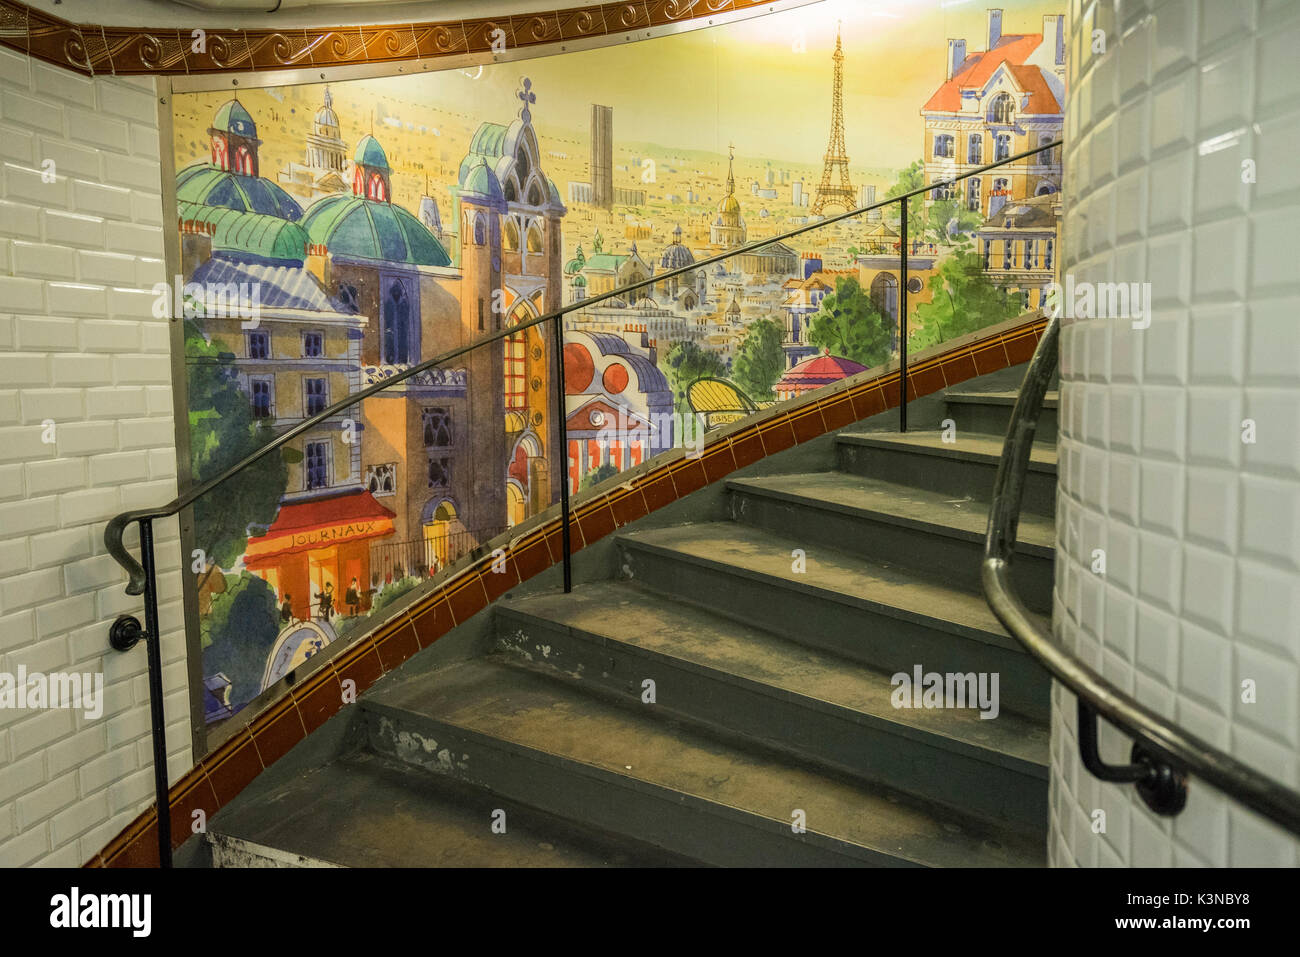 Abbesses: painted mural and spiral staircase. Station Abbesses, Paris, France Stock Photo